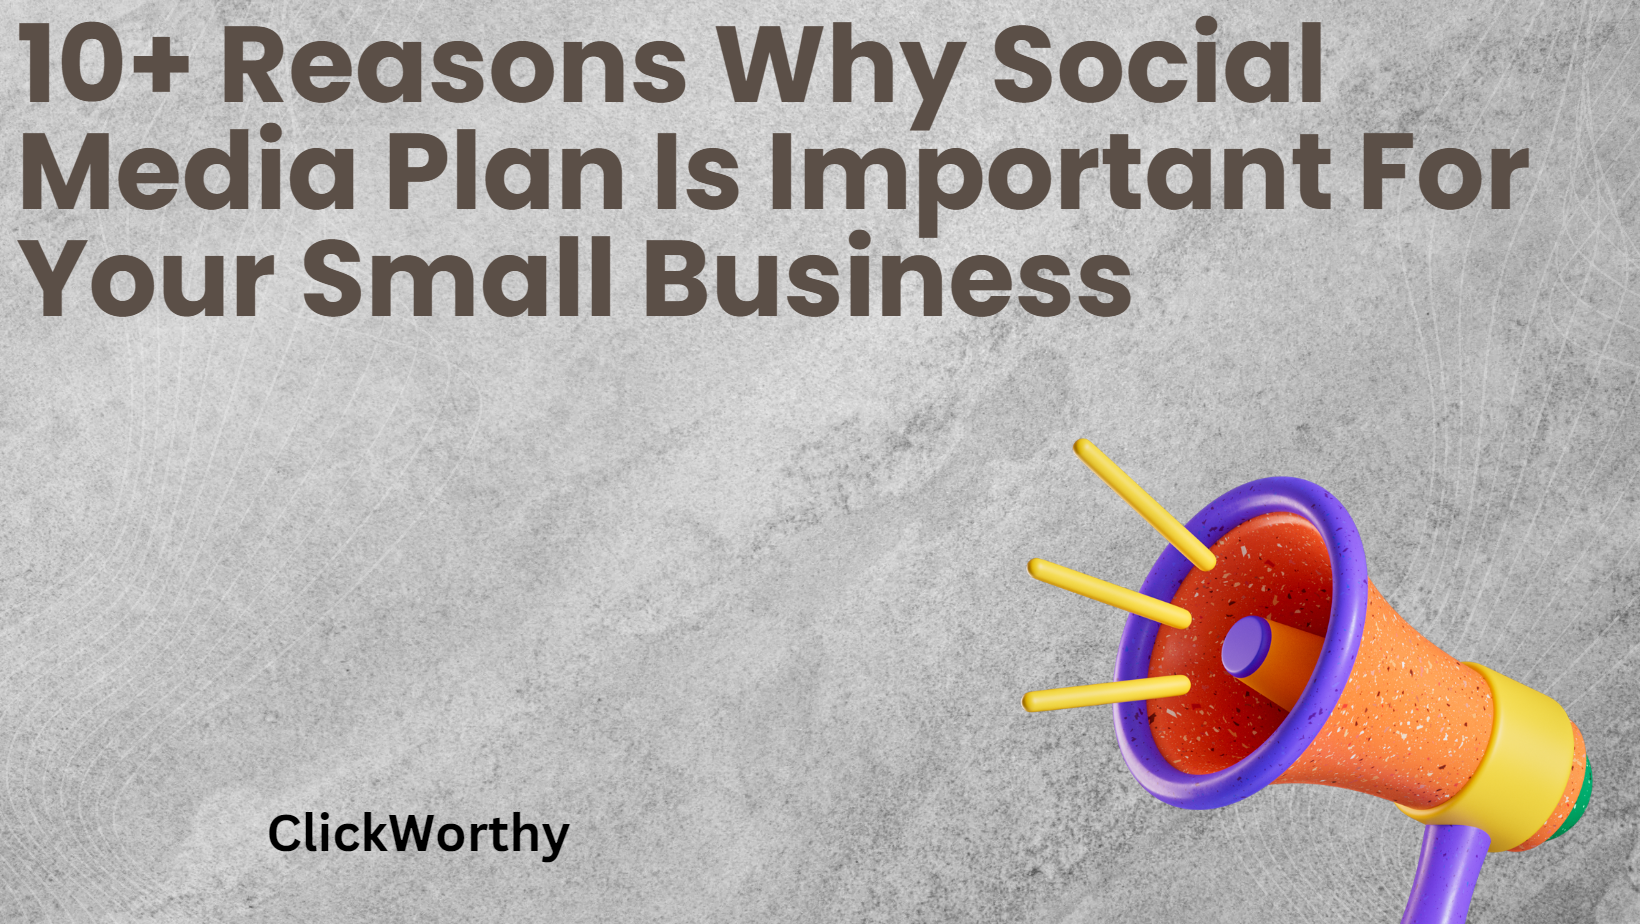 10+ Reasons Why Social Media Plan Is Important For Your Small Business